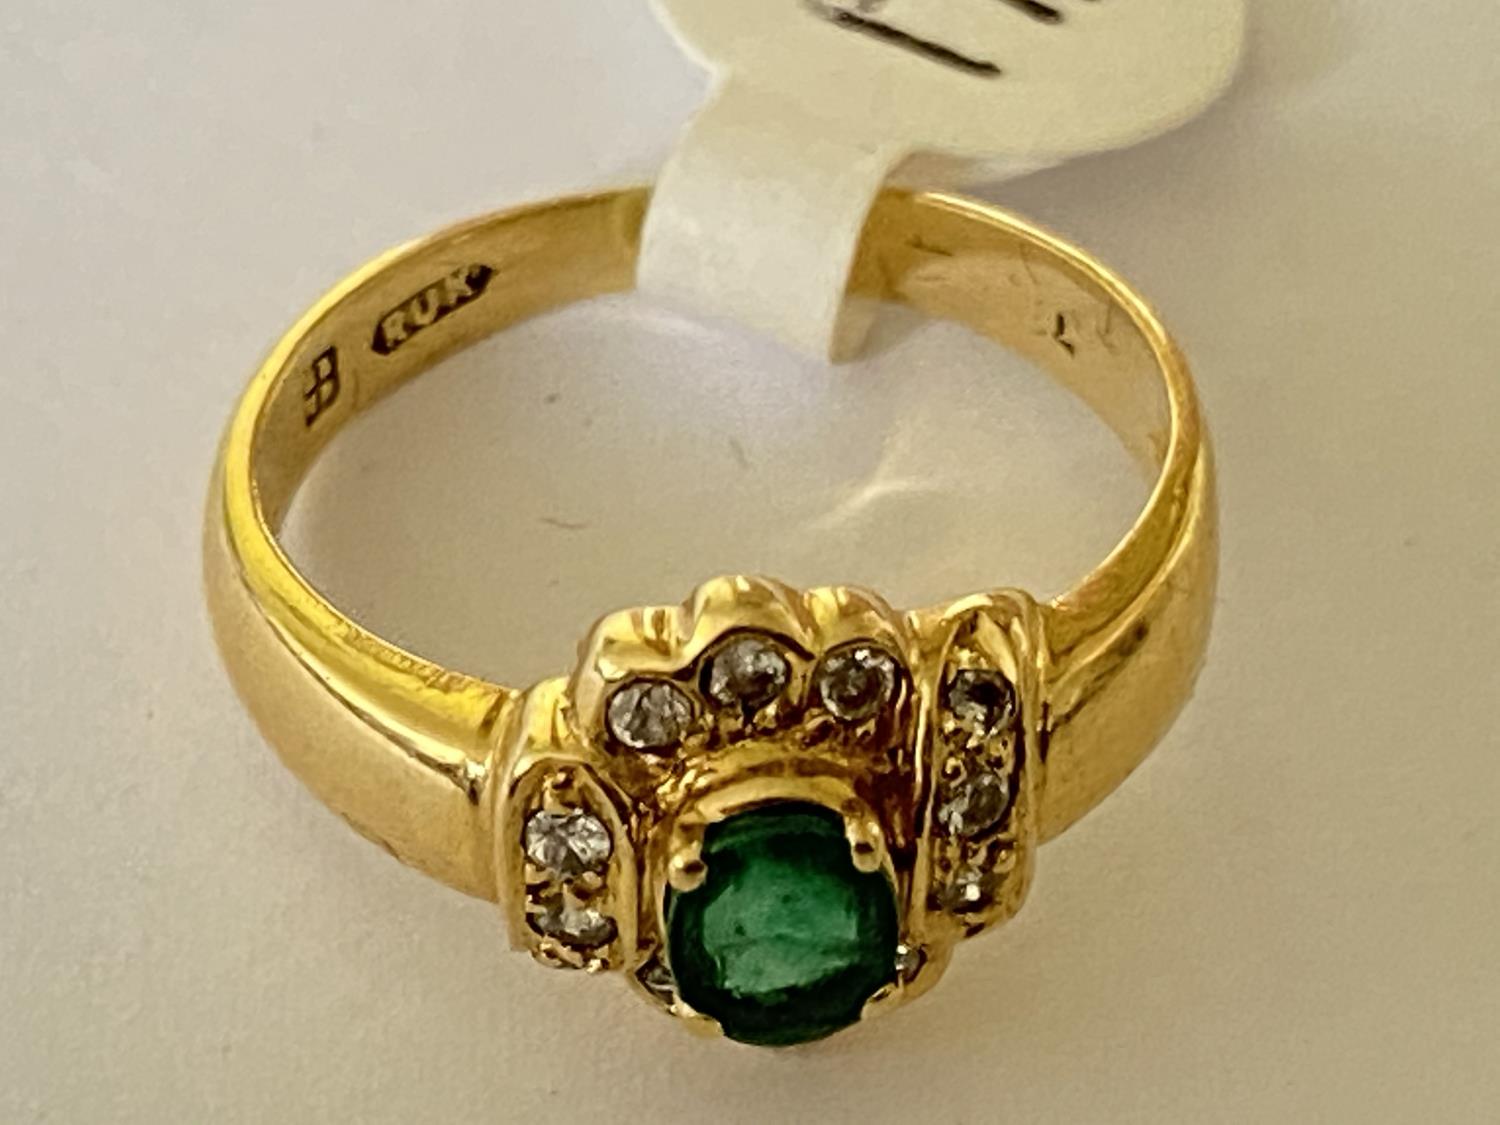 AN 18 CARAT YELLOW GOLD, EMERALD AND DIAMOND CHIP RING - WEIGHT 2.7 GRAMS, RING SIZE K